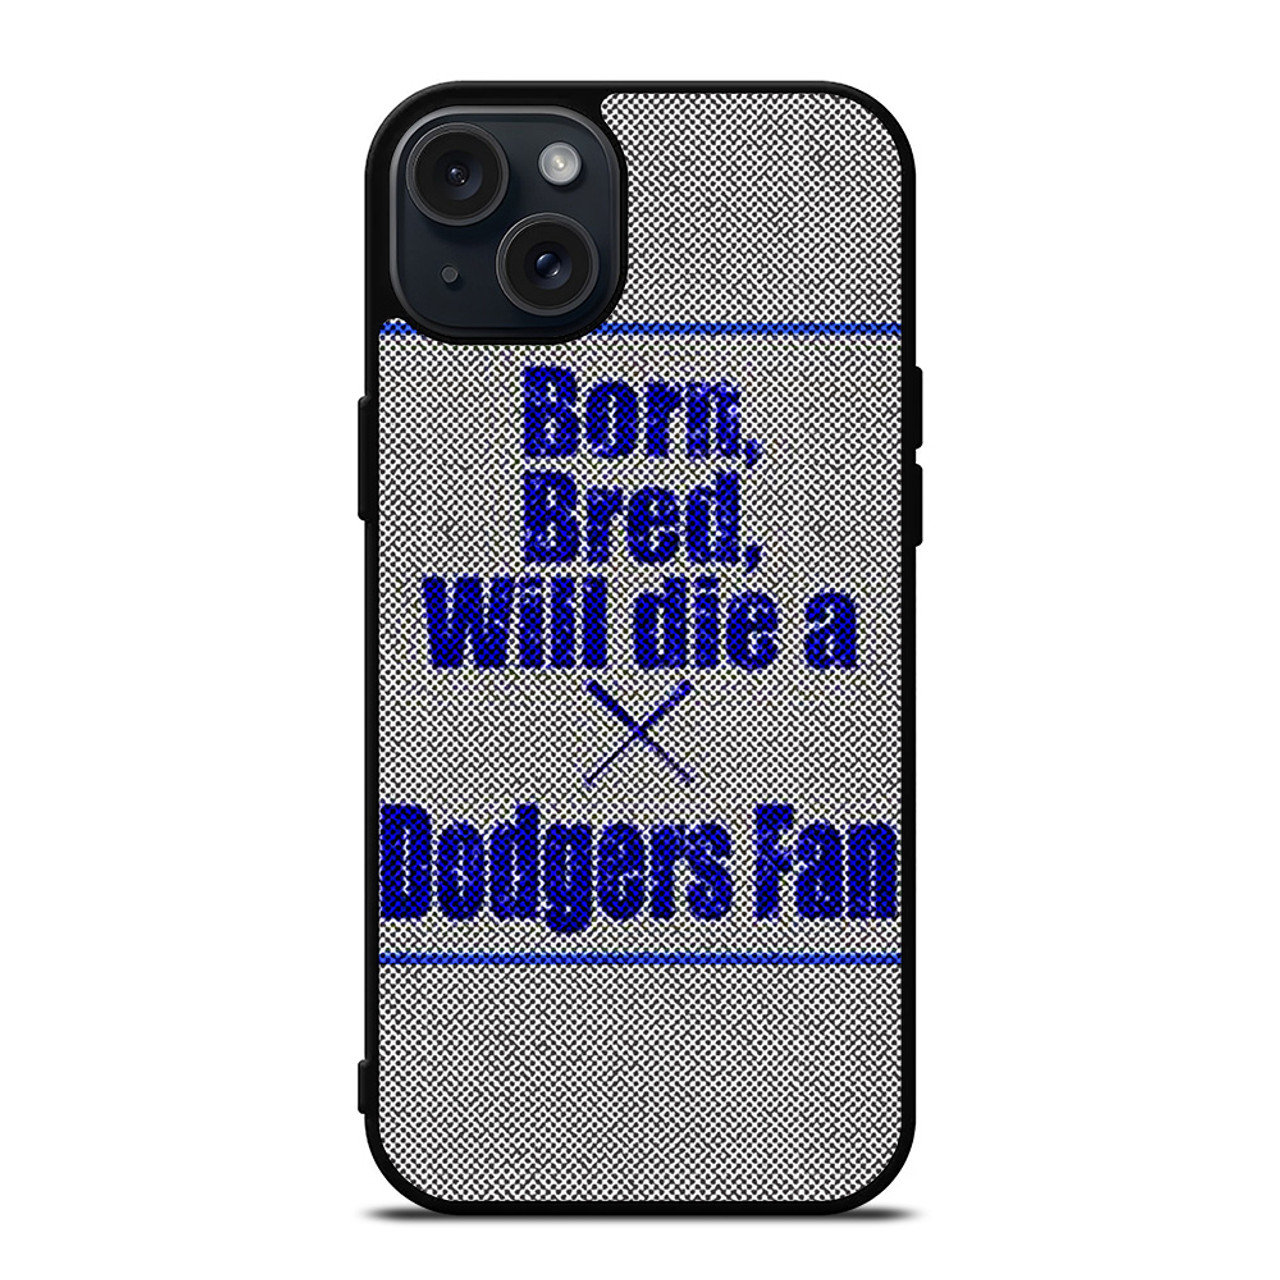  for Dodger Baseball Fans Case Cover Compatible with